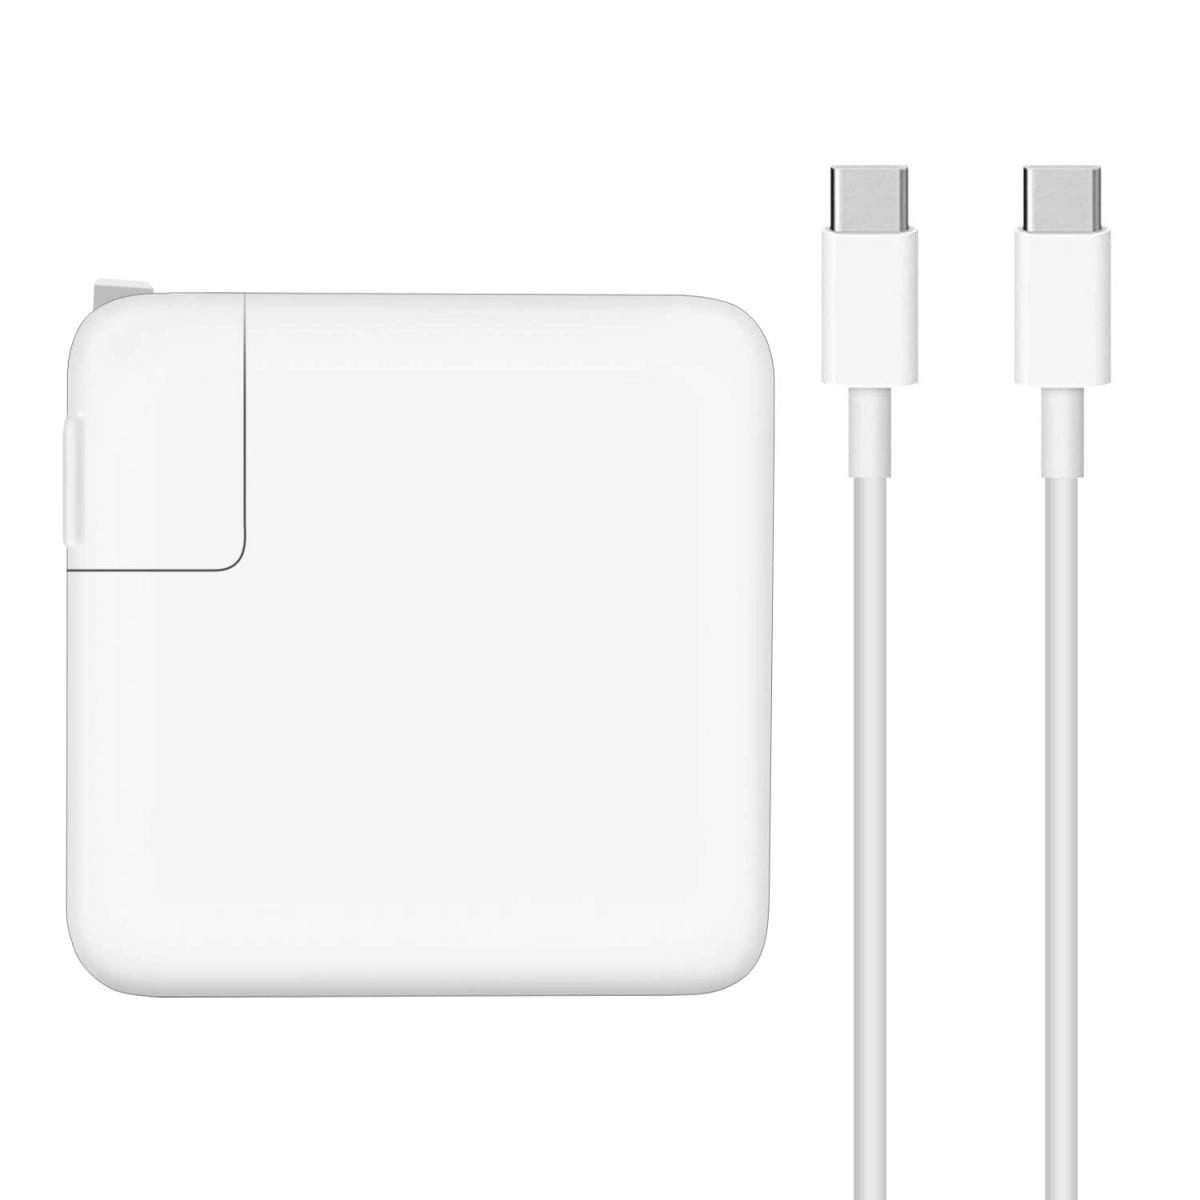 Apple 87W Power Adapter USB-C Charge Cable MacBook Pro (15-inch, 2018) MacBook Pro (15-inch, 2017) MacBook Pro (15-inch, 2016) - WMart